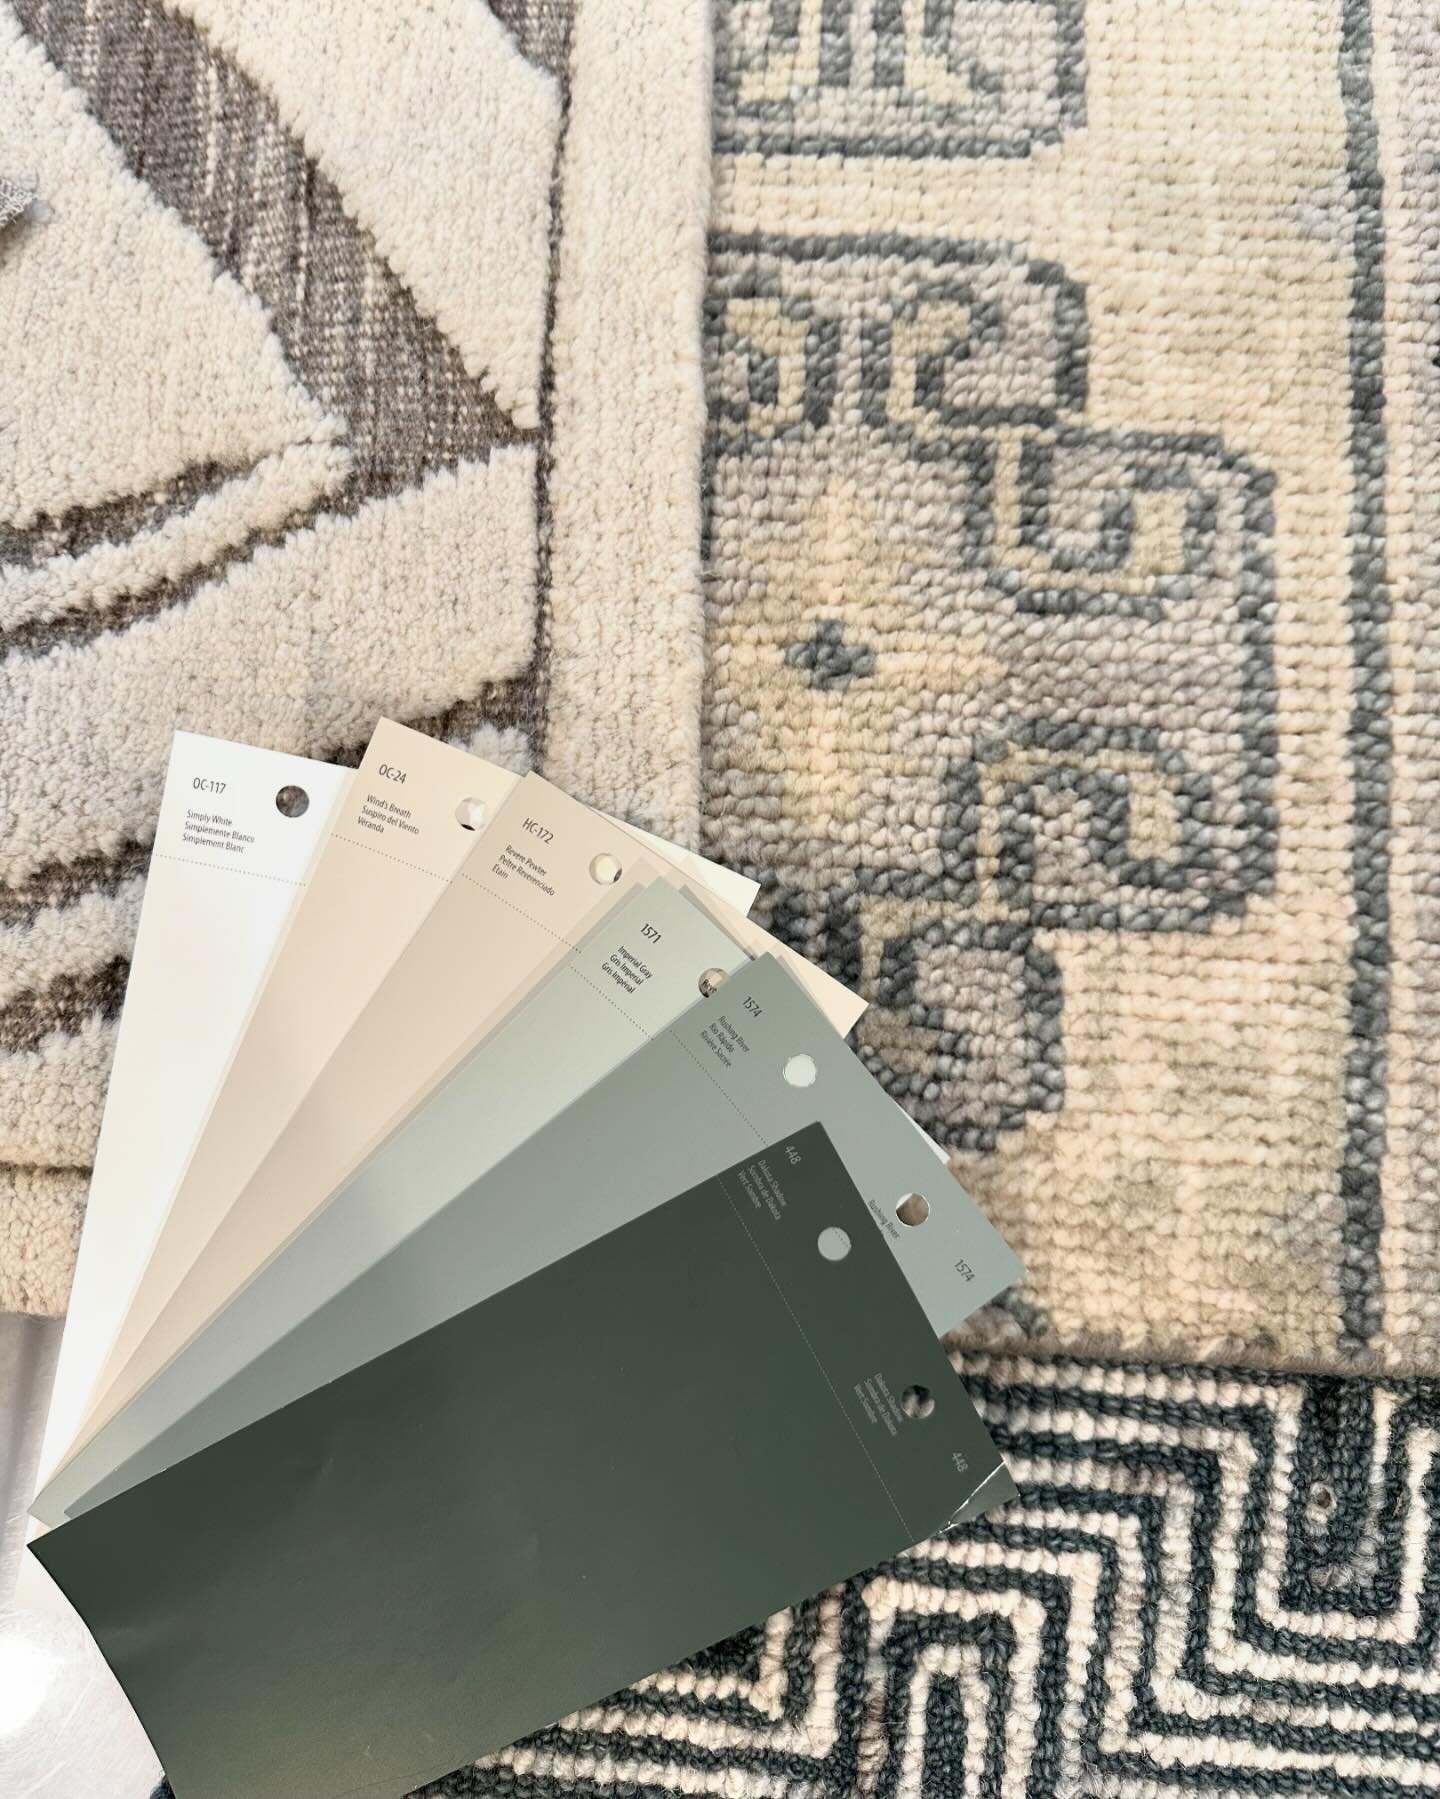 Beautiful things in the works! 💚 New modern, classic finishes to enhance the original character of a 1912 Millburn home. Can&rsquo;t wait to show you more! 

#interiordesignerlife #gutrenovation #millburnnj #millburnshorthills #interiordesignnj #bat